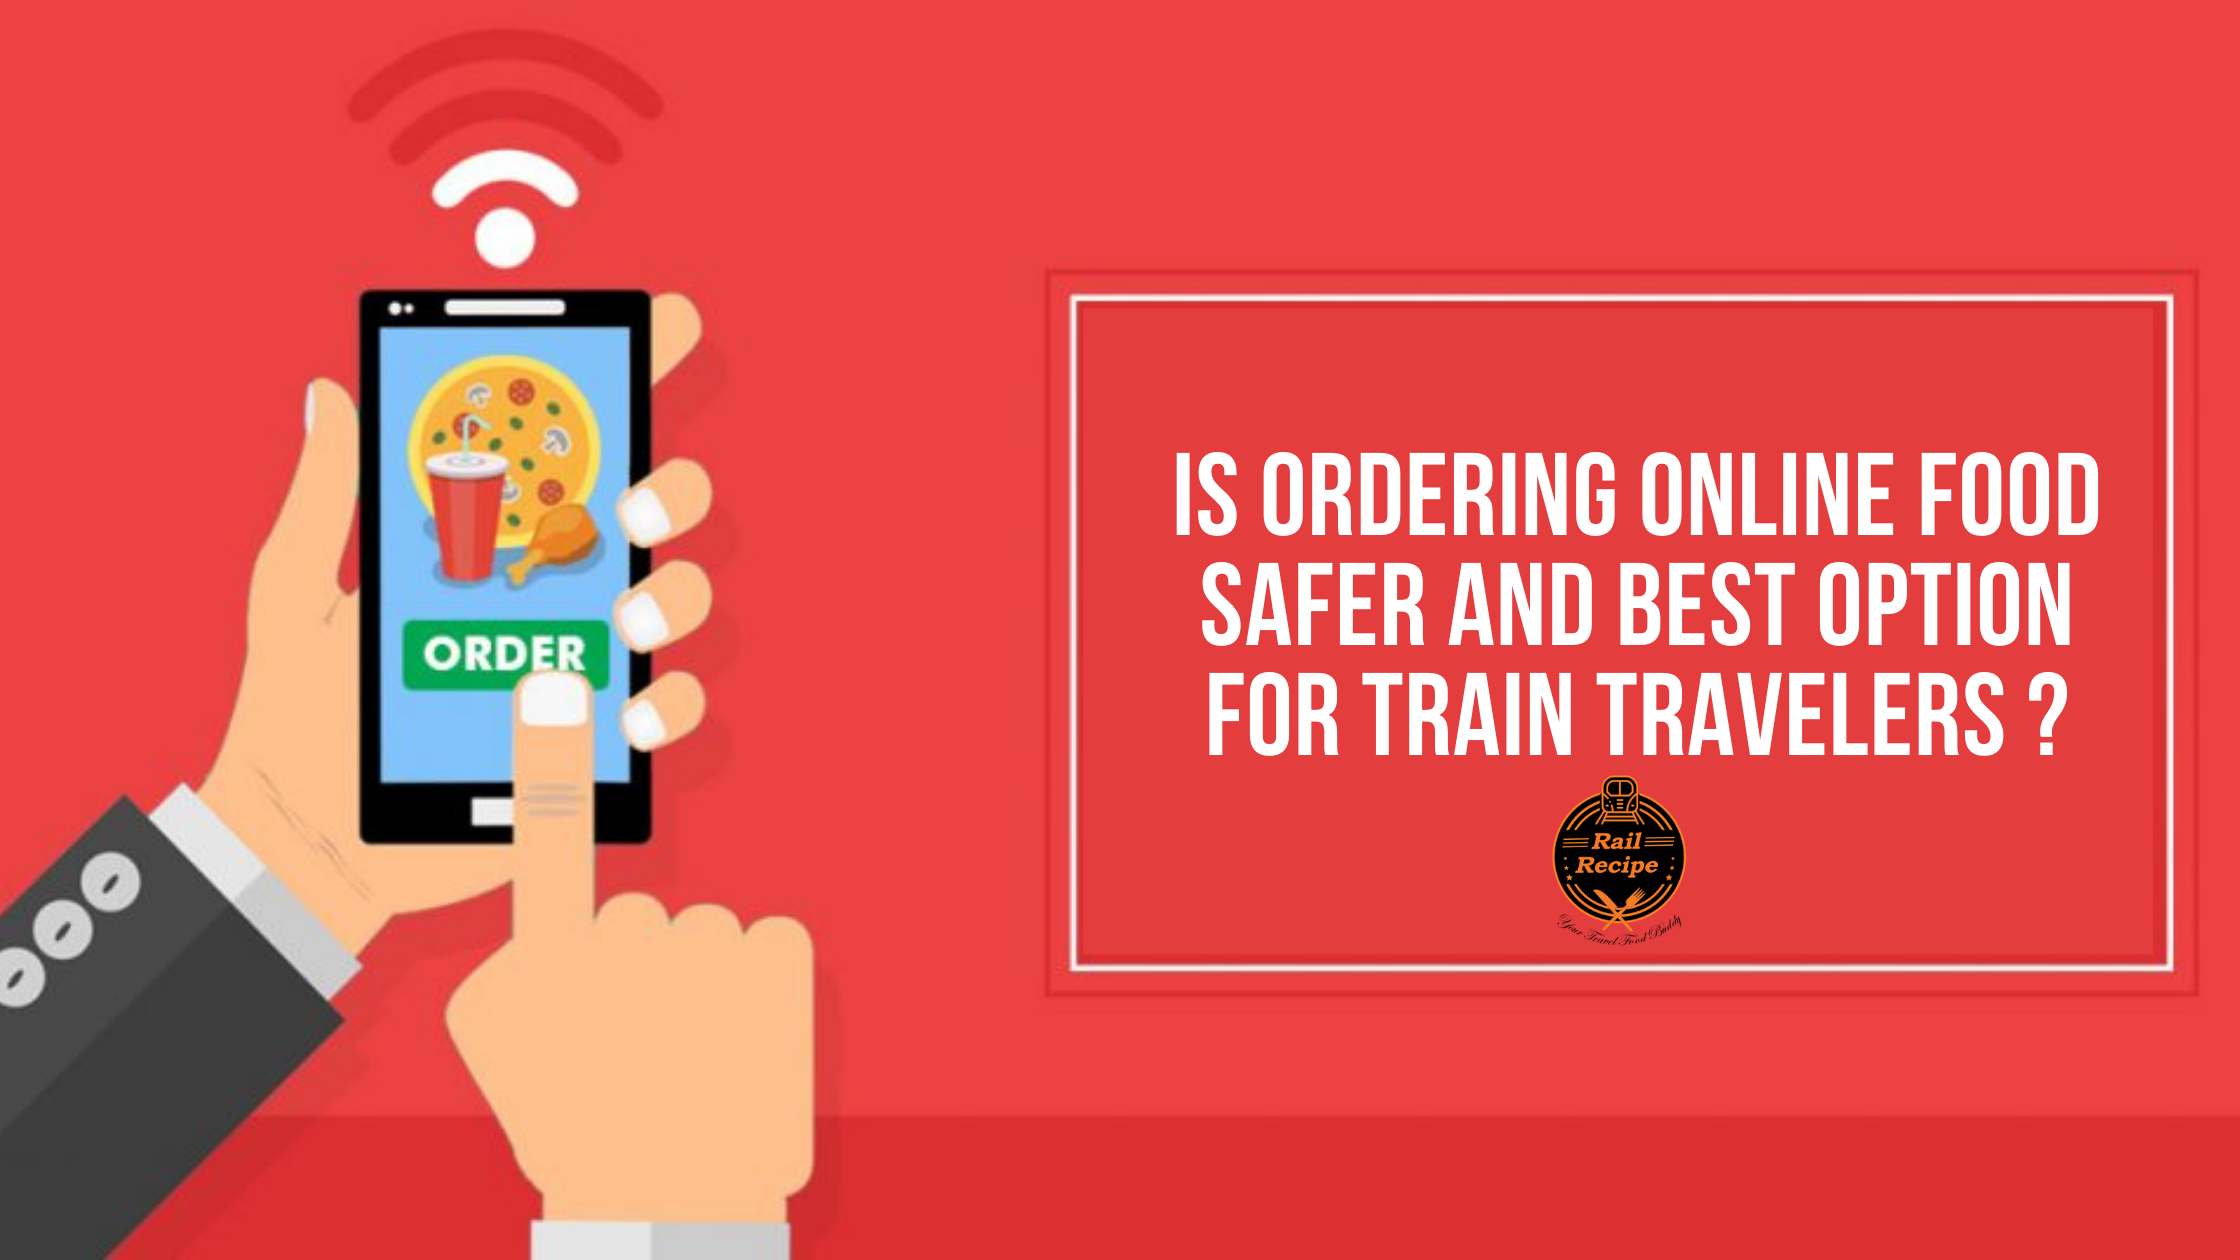 Is Ordering Online Food Safer for Train Travelers